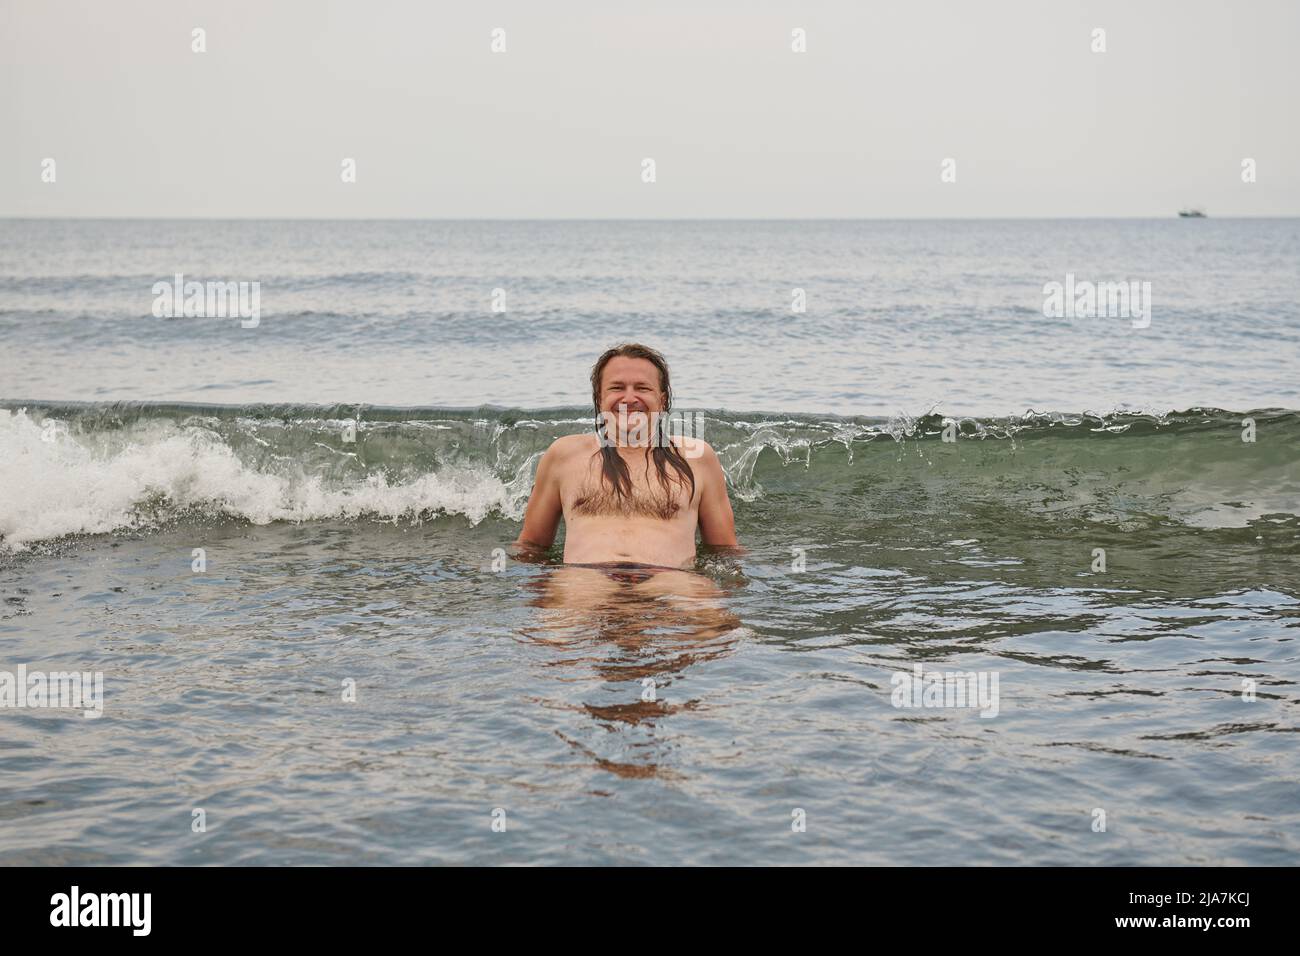 hairy man in the sea on the crest of a wave Stock Photo